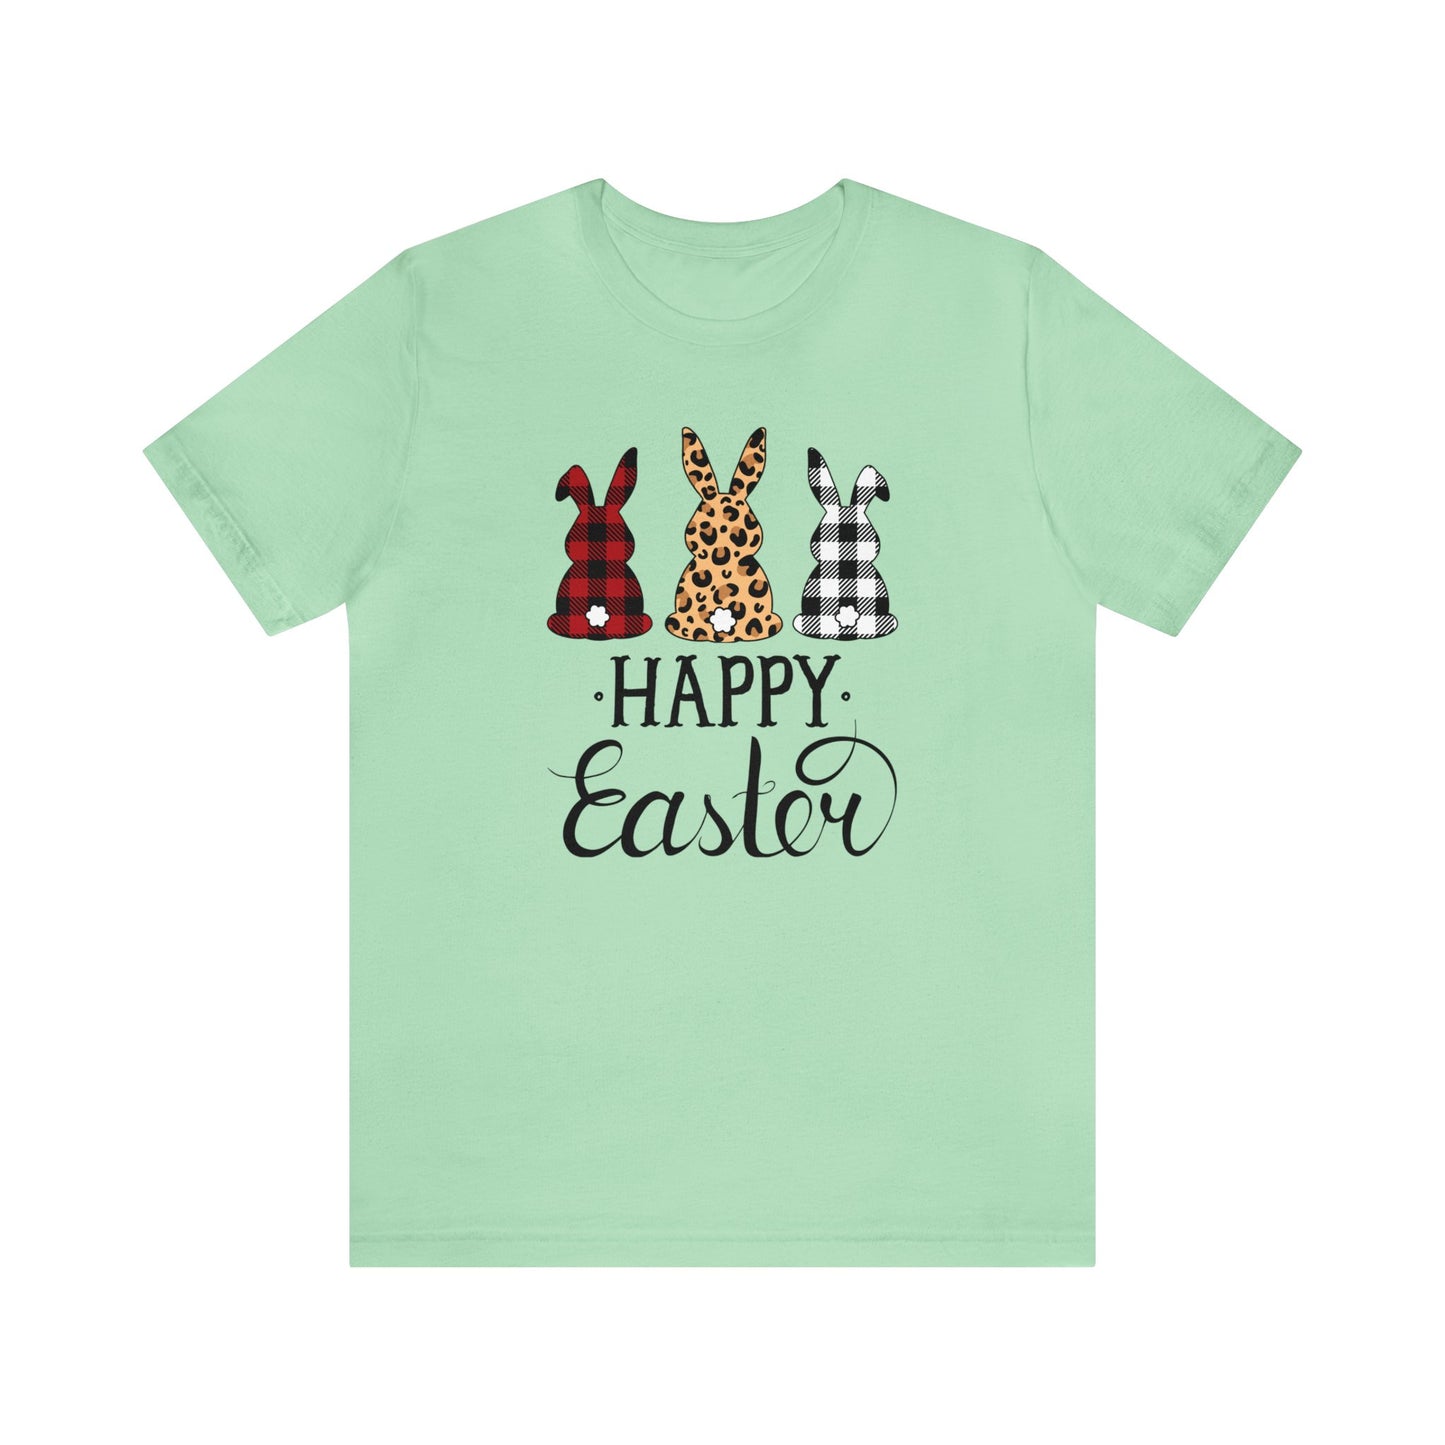 Cottontail T-Shirt For Bunny TShirt For Happy Easter T Shirt